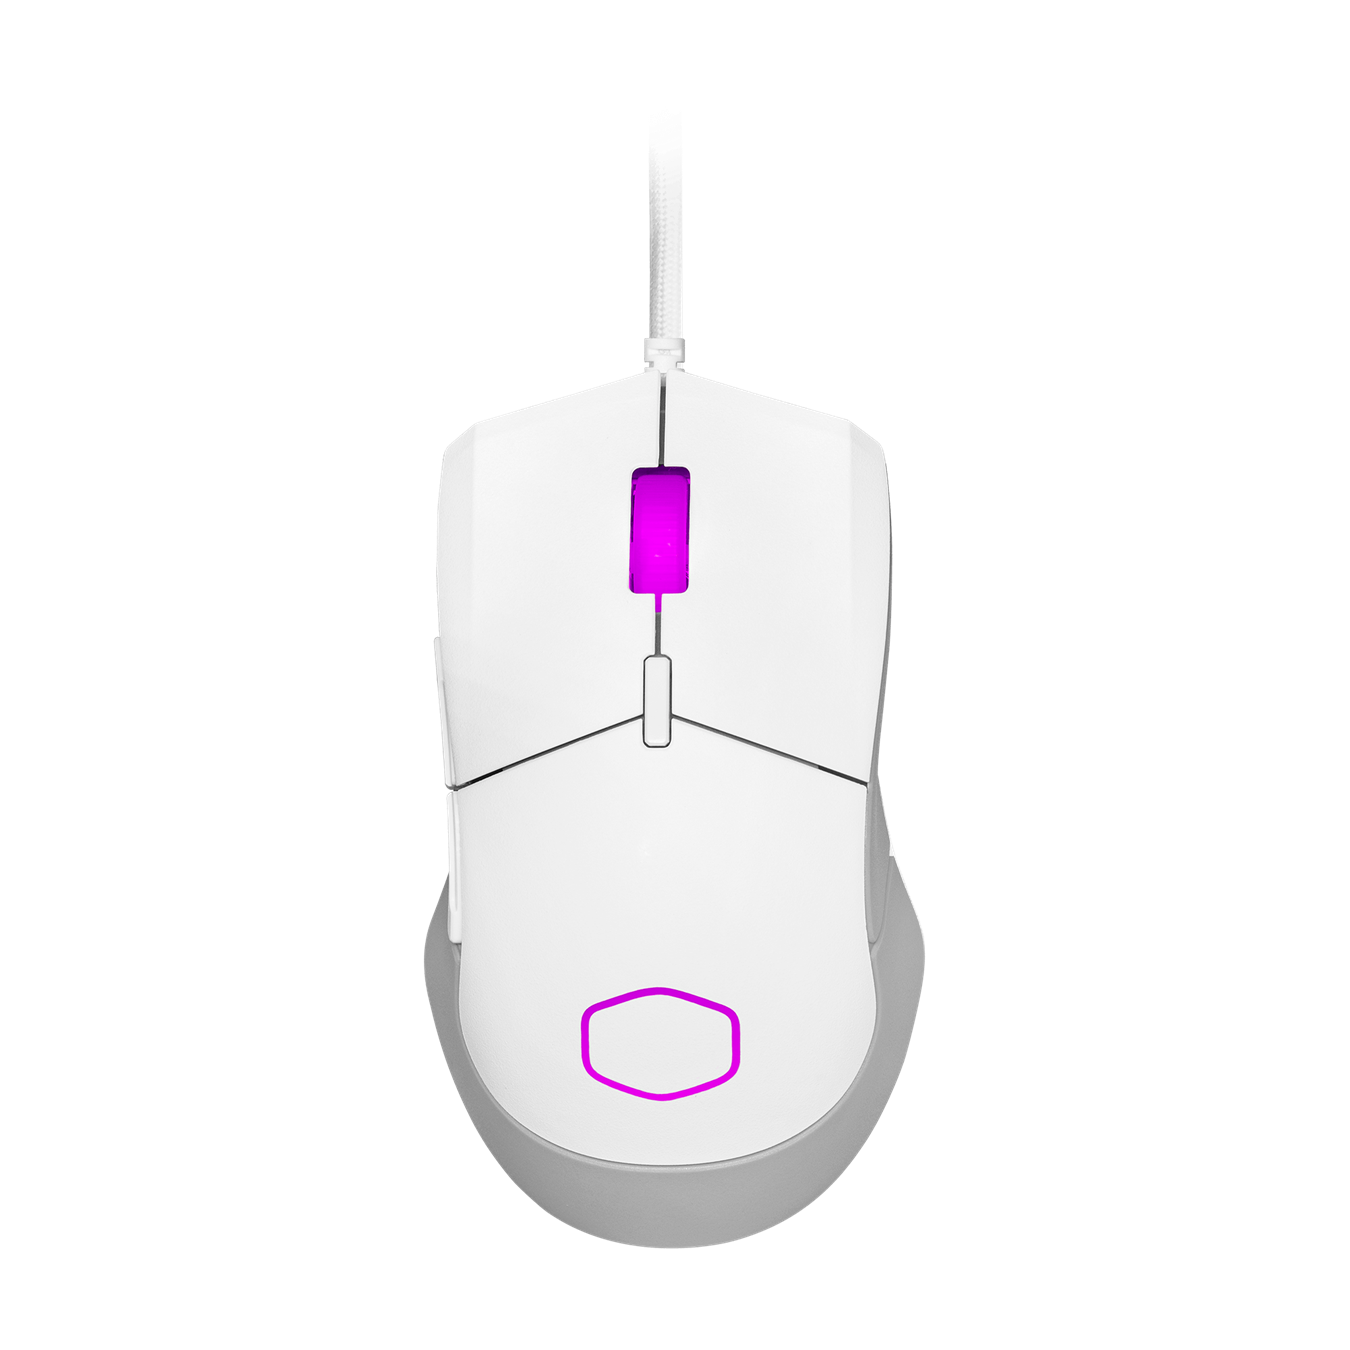 MM310 White Edition Gaming Mouse - Adapt to your game or playstyle with optical sensor adjustable up to 12,000 DPI